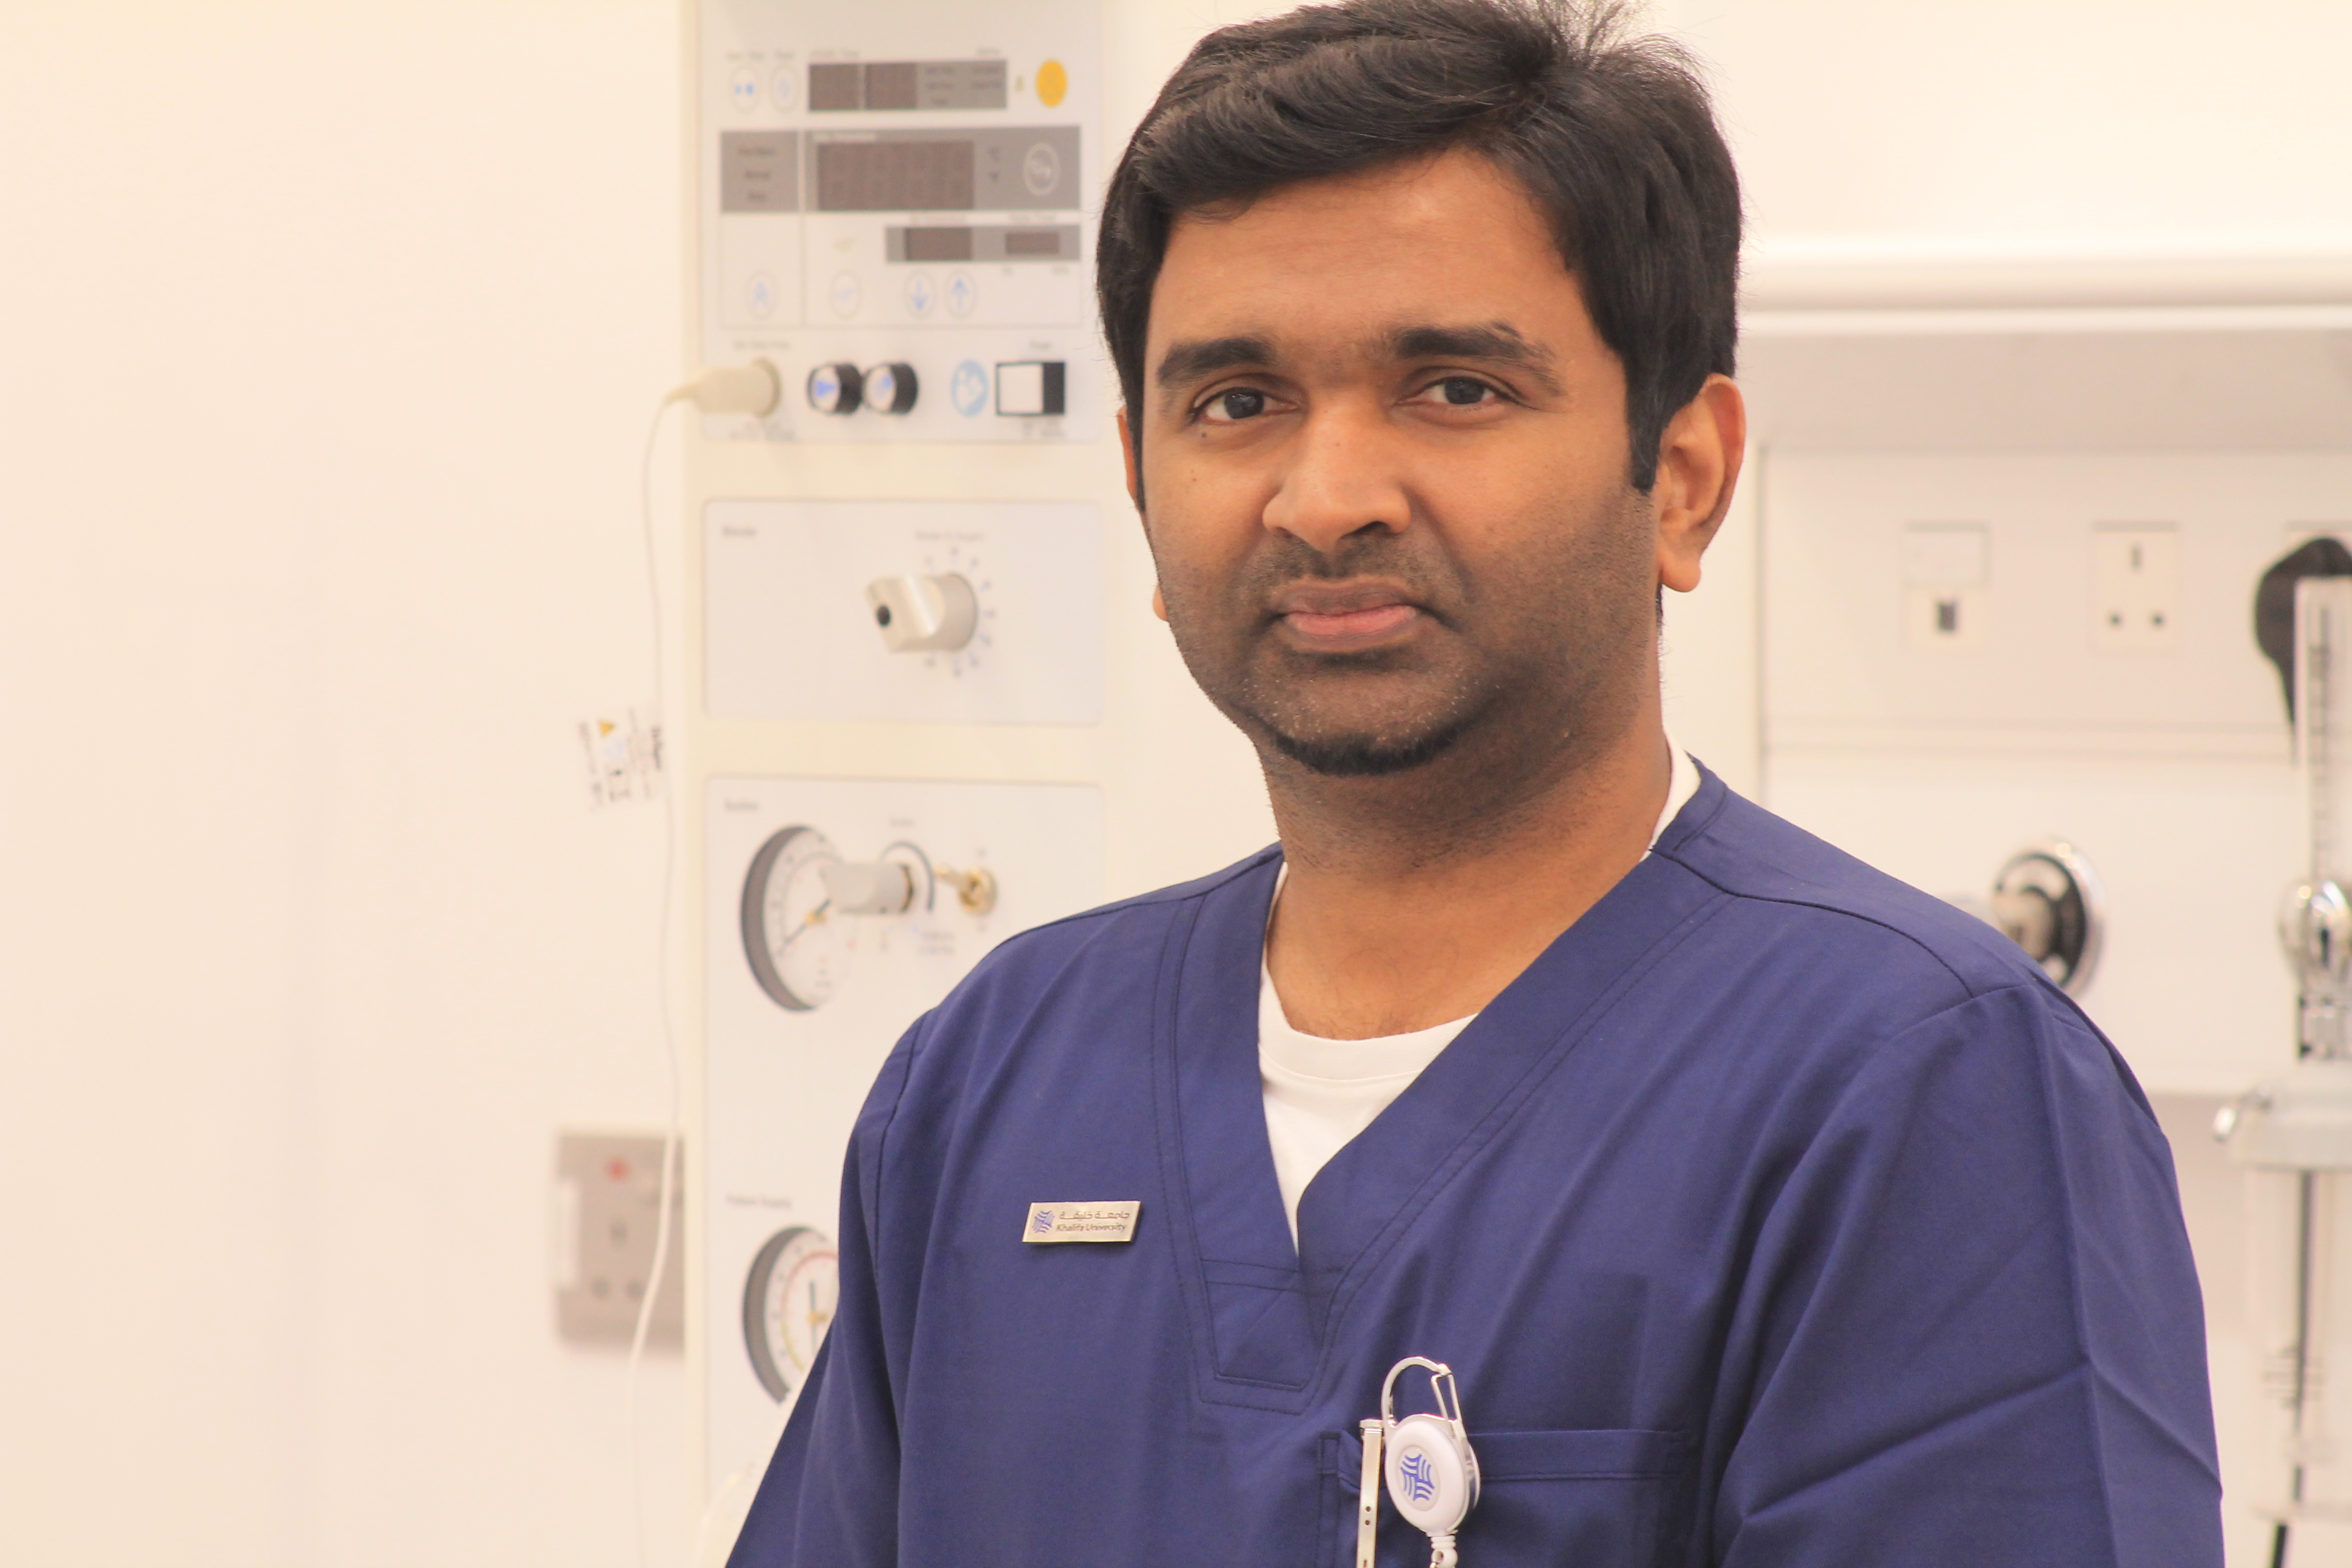 CMHS Simulation Specialist is the First from the UAE to Receive CHSOS-A™ Title